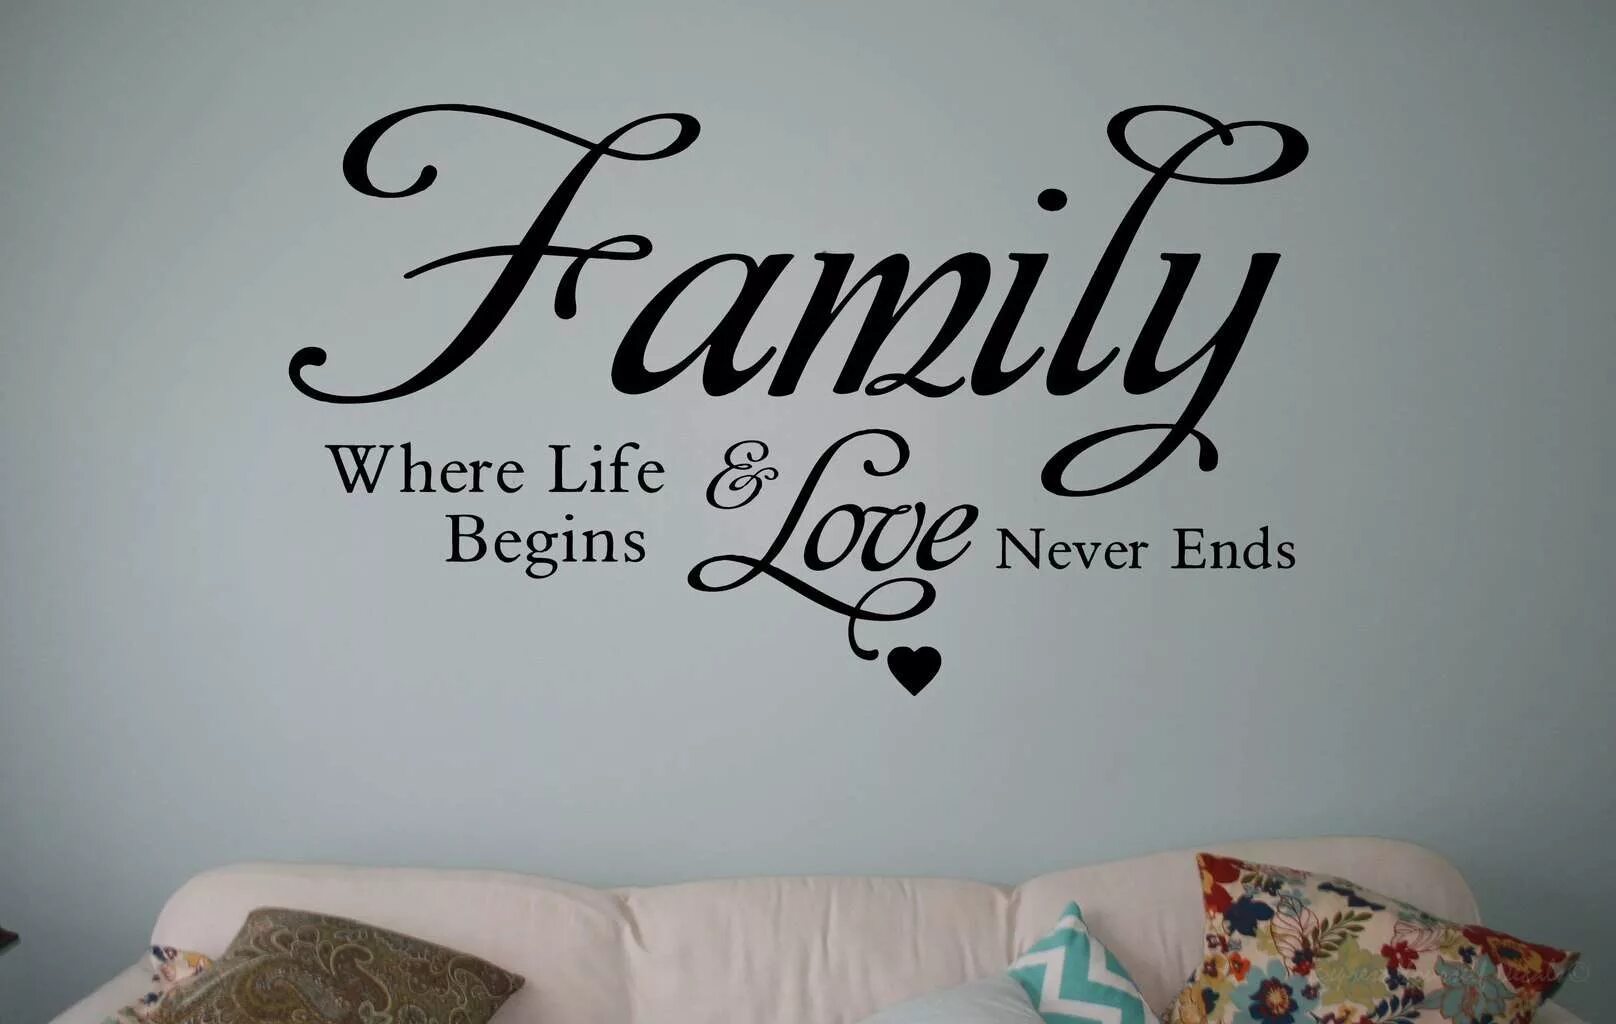 We are good family. Family where Life begins and Love never ends. Надпись Family where Life begins. Love never ends. Family where Life begins and Love never ends перевод на русский.